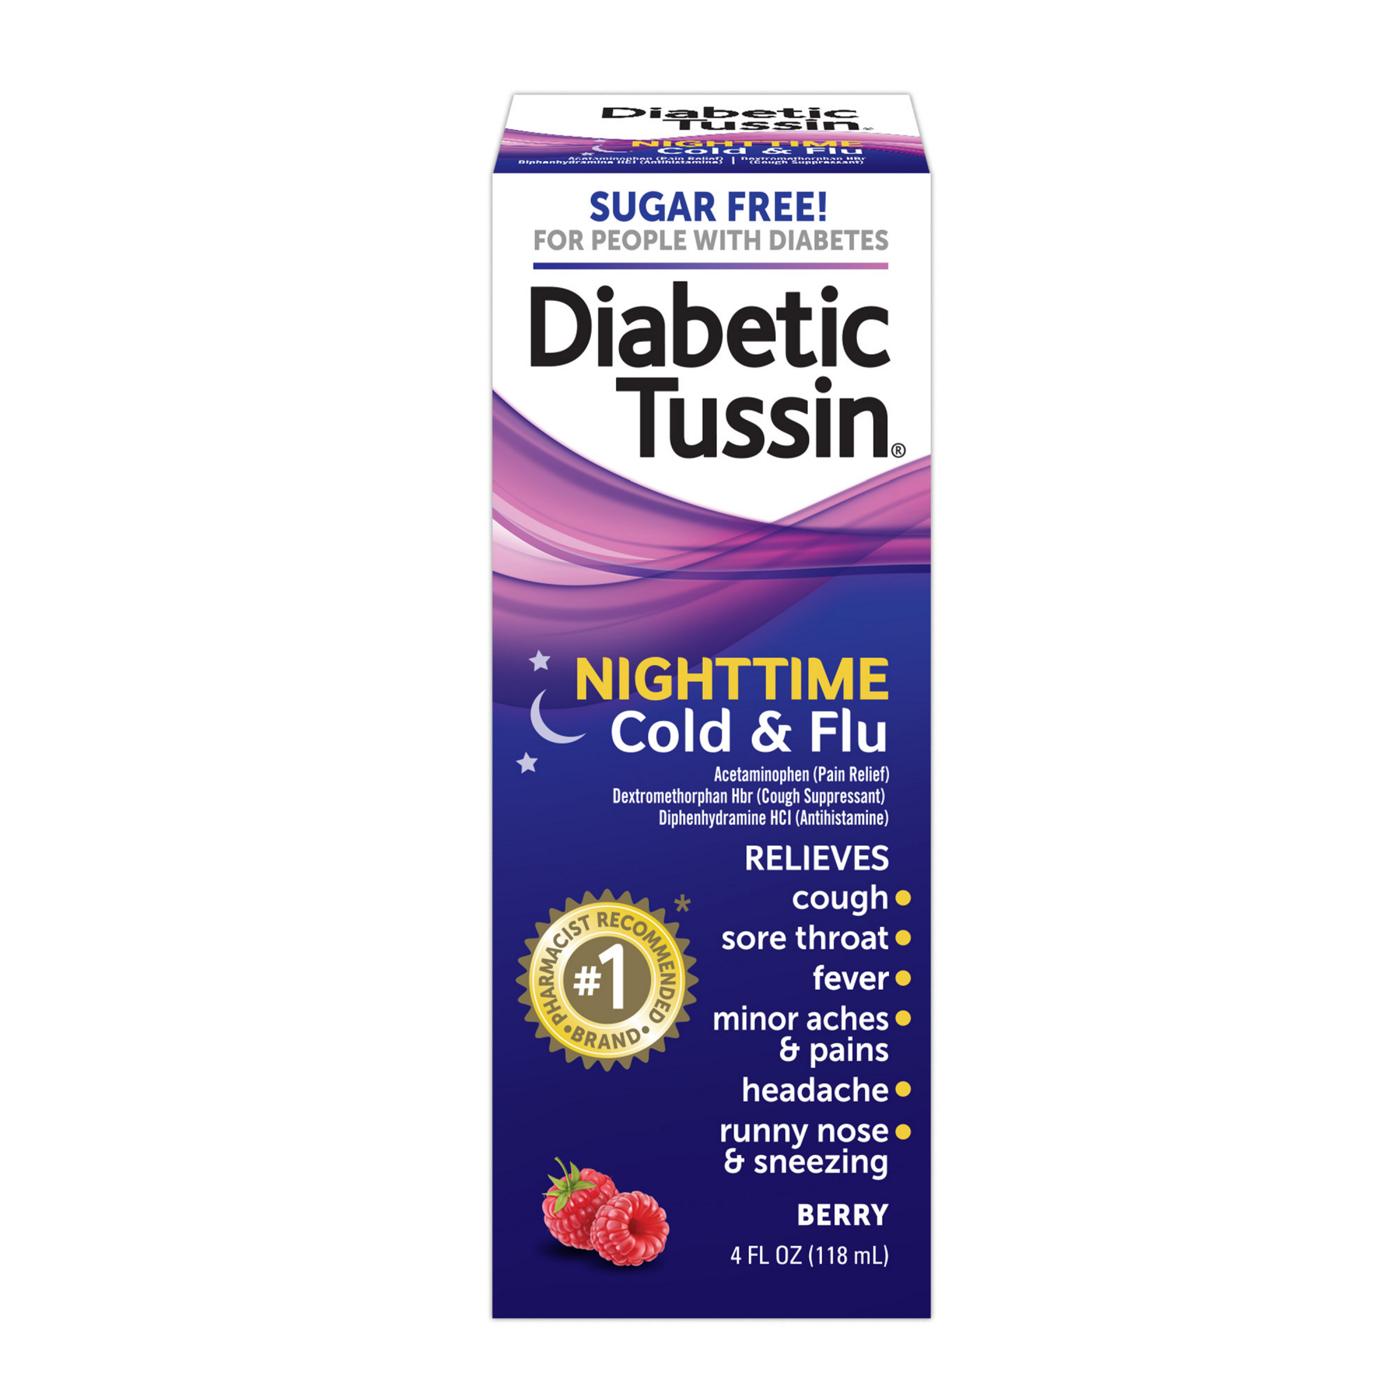 Diabetic Tussin Nighttime Cold & Flu Liquid - Berry; image 1 of 2